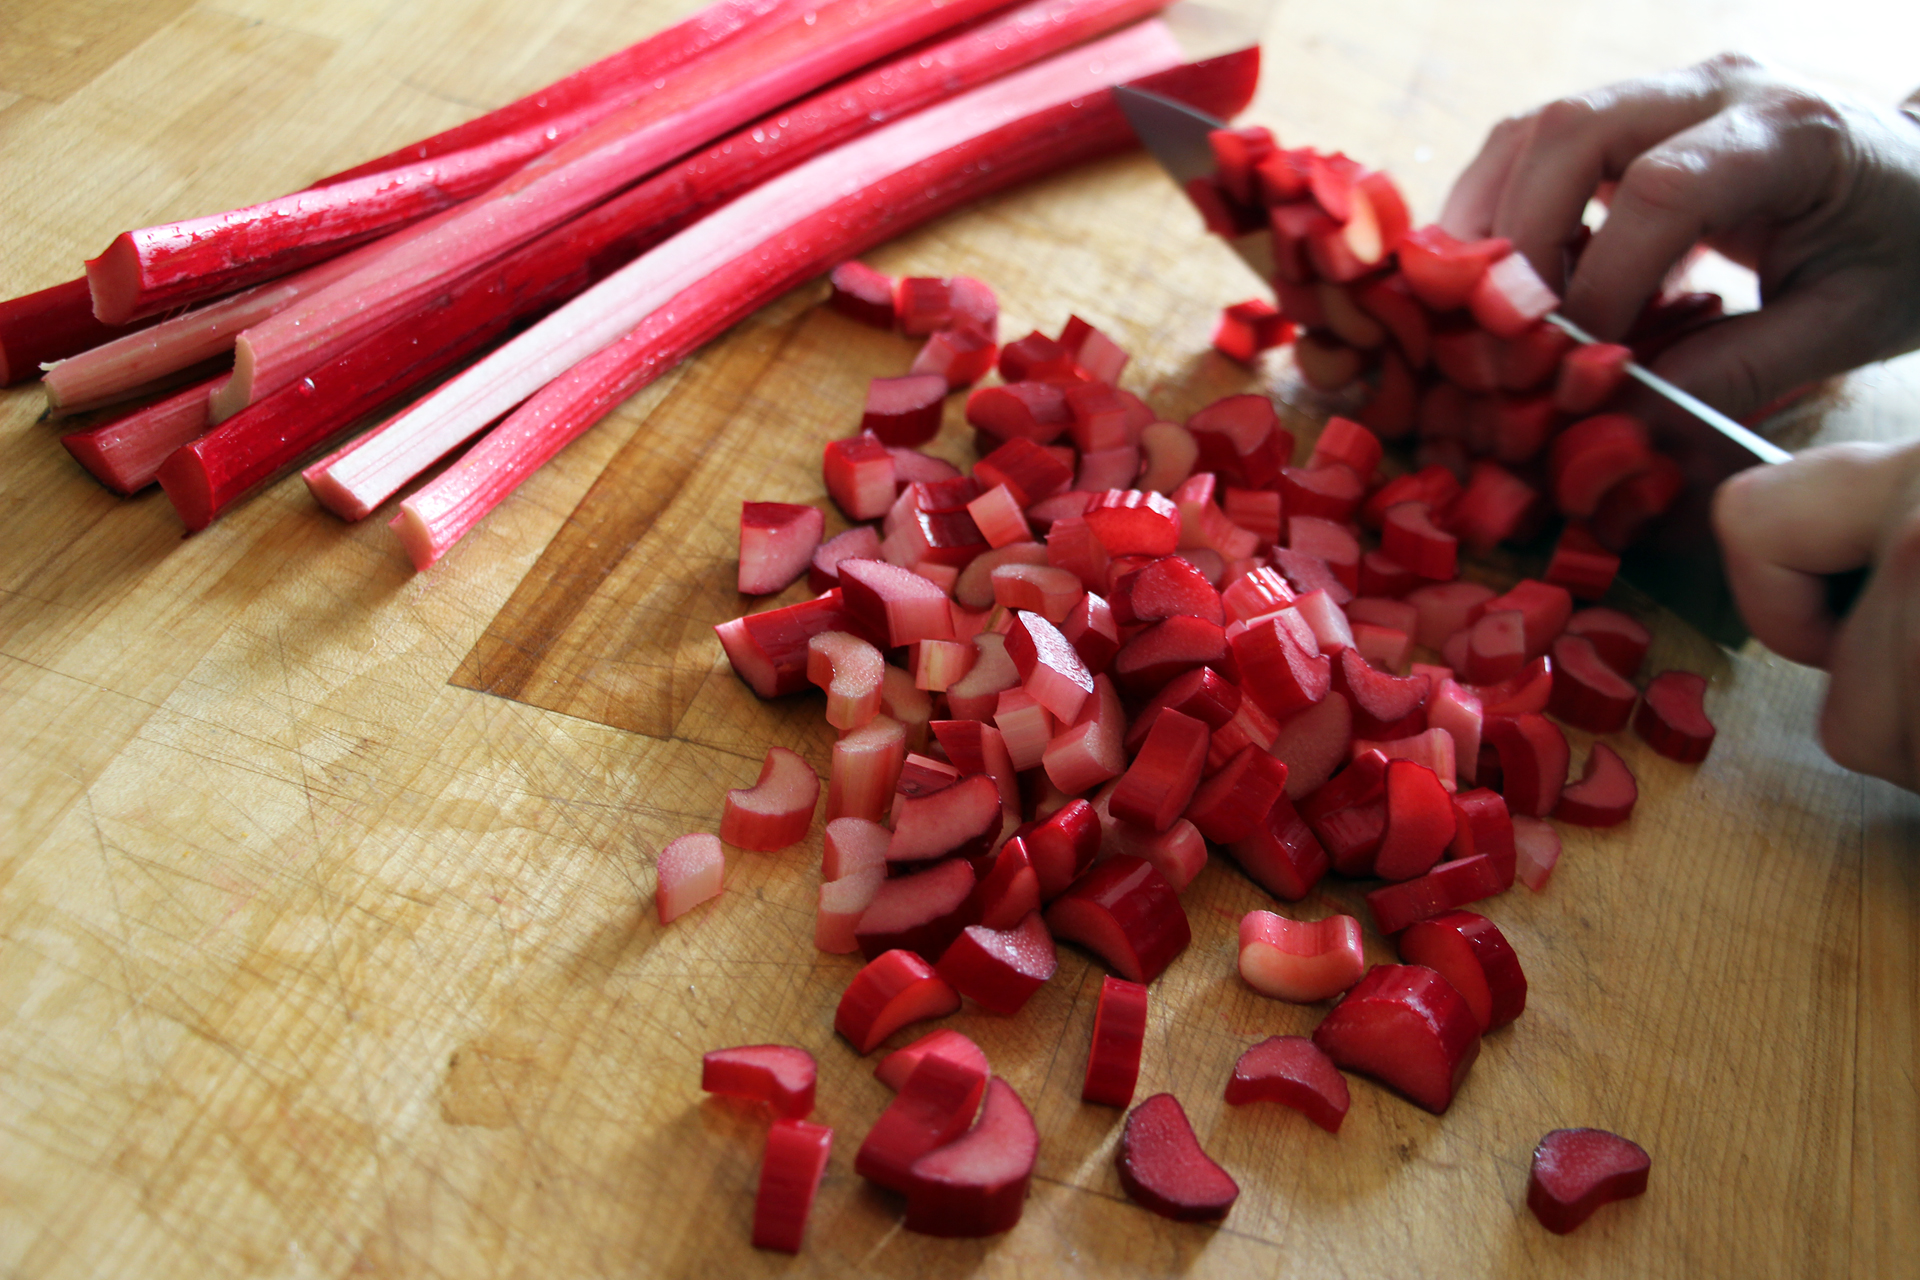 Rhubarb, trimmed and cut into 1/2-inch pieces